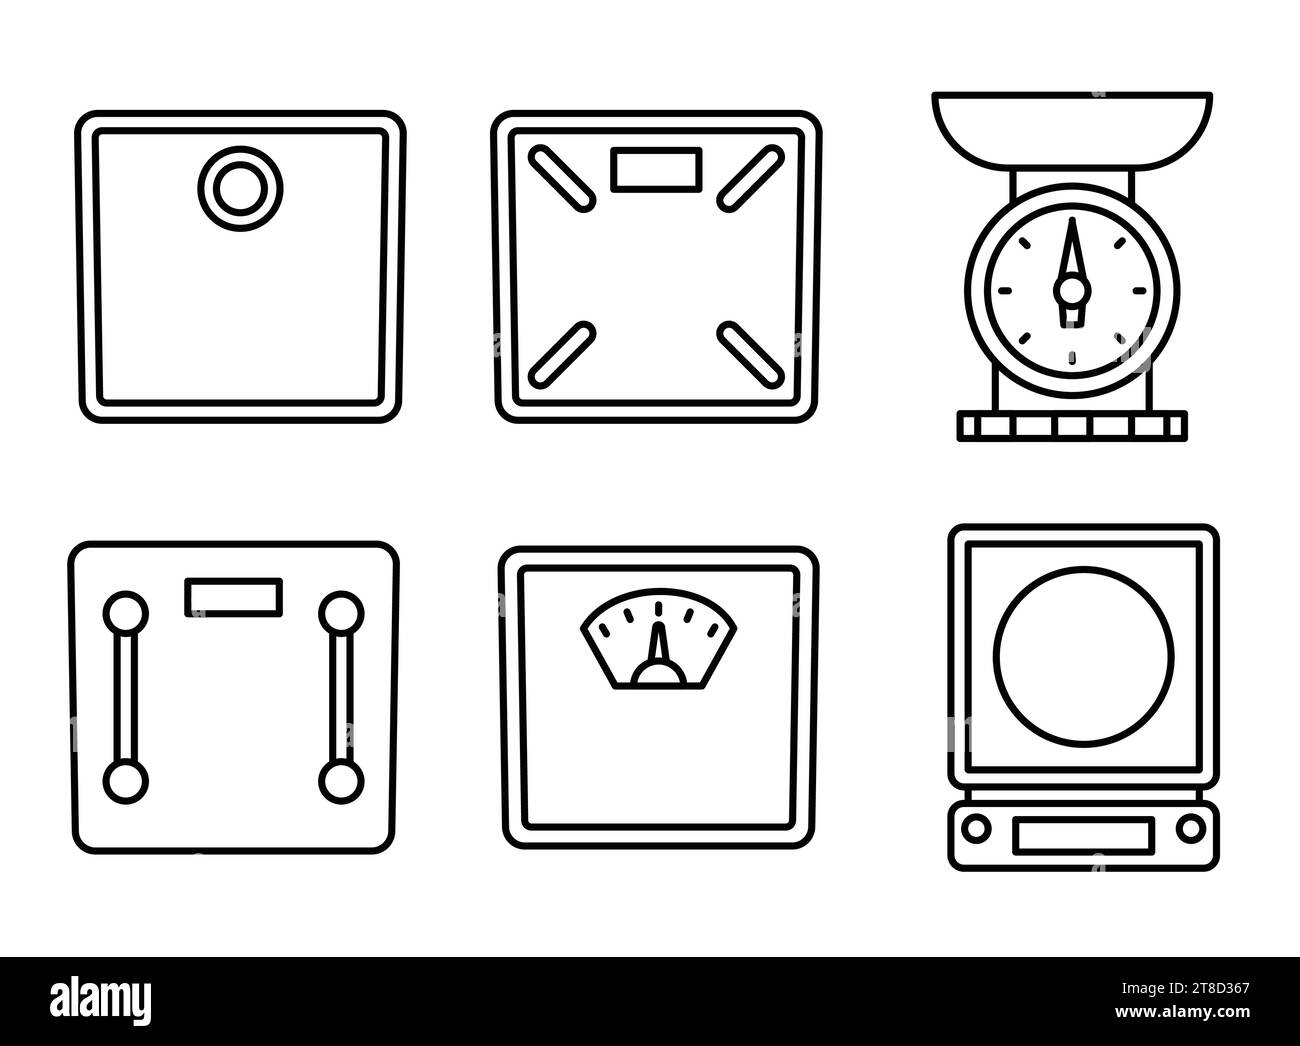 https://c8.alamy.com/comp/2T8D367/analog-and-digital-body-weight-scale-icon-set-mechanical-scale-vector-illustration-outline-object-isolated-on-white-background-icon-for-web-2T8D367.jpg